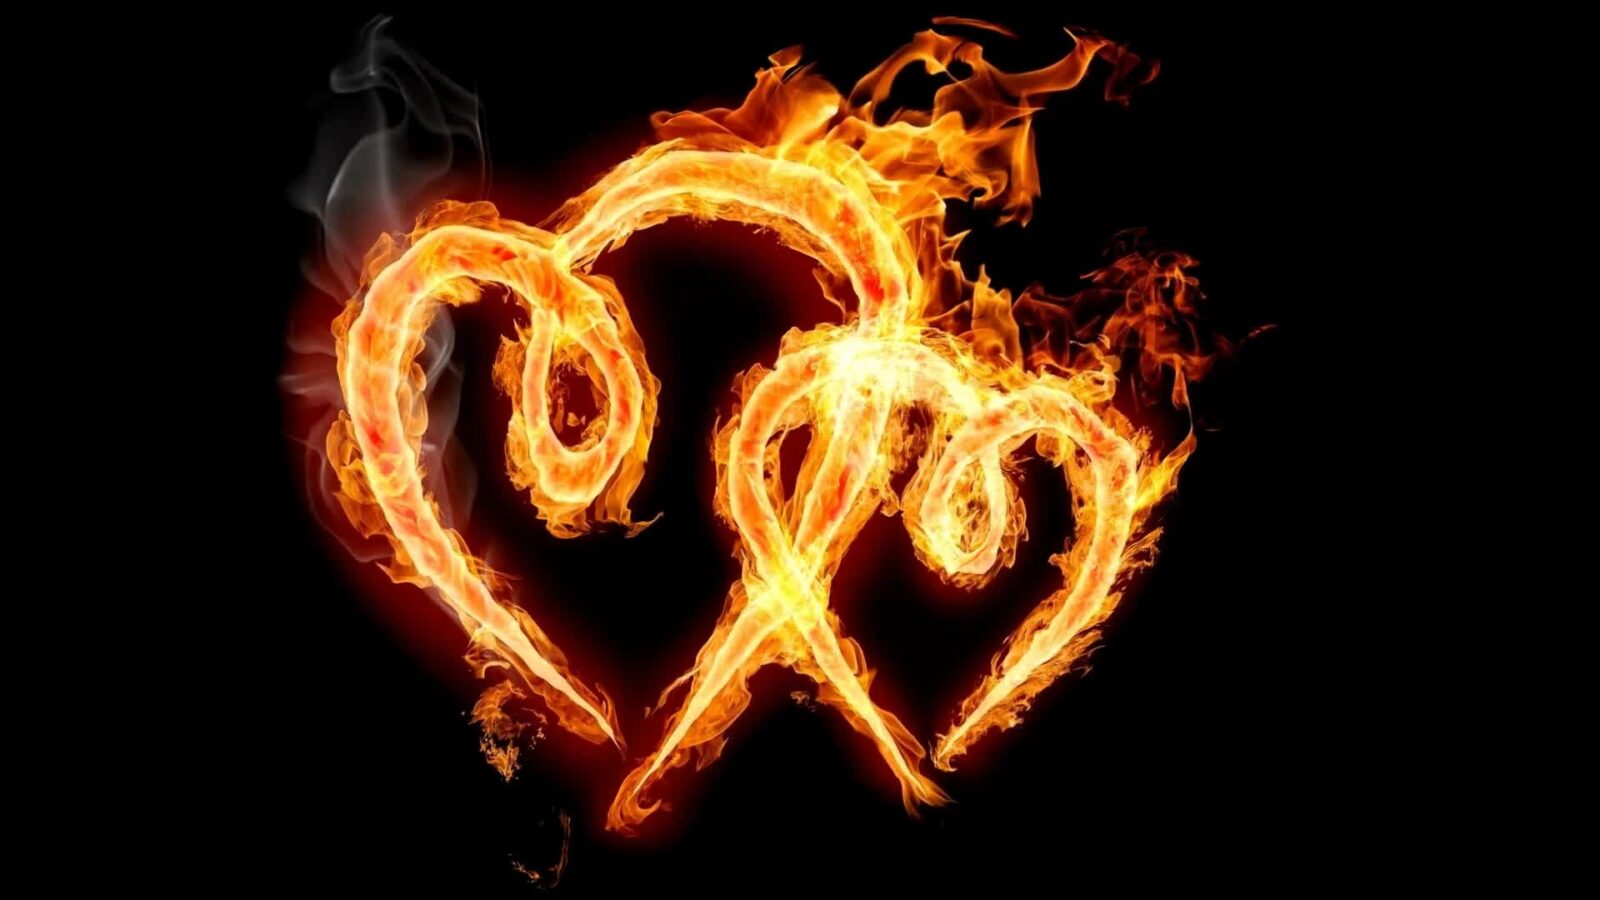 Heart In Flame Fantasy Love - Free Live Wallpaper